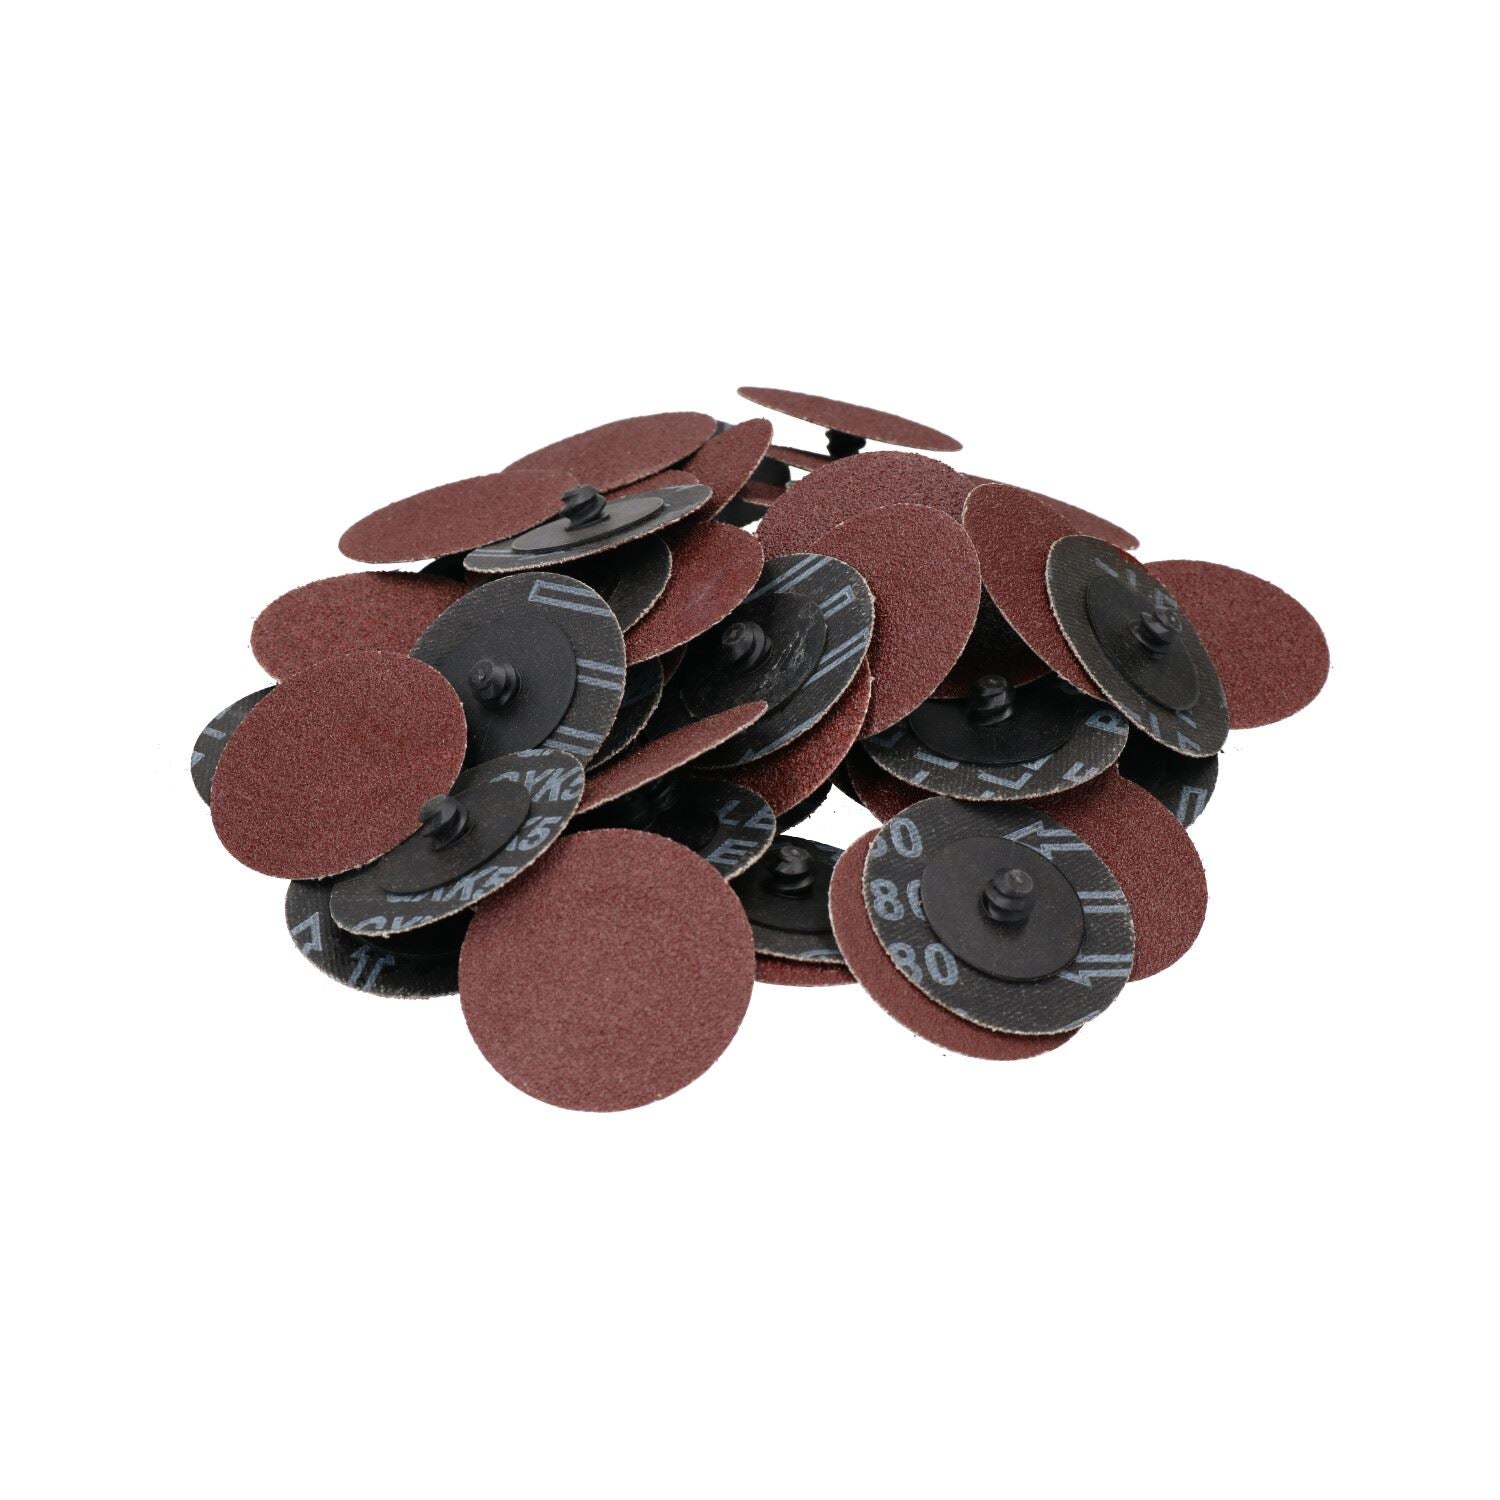 80 Grit 50mm Coarse Quick Change Sanding Discs Rust Removal Deburring 50pc